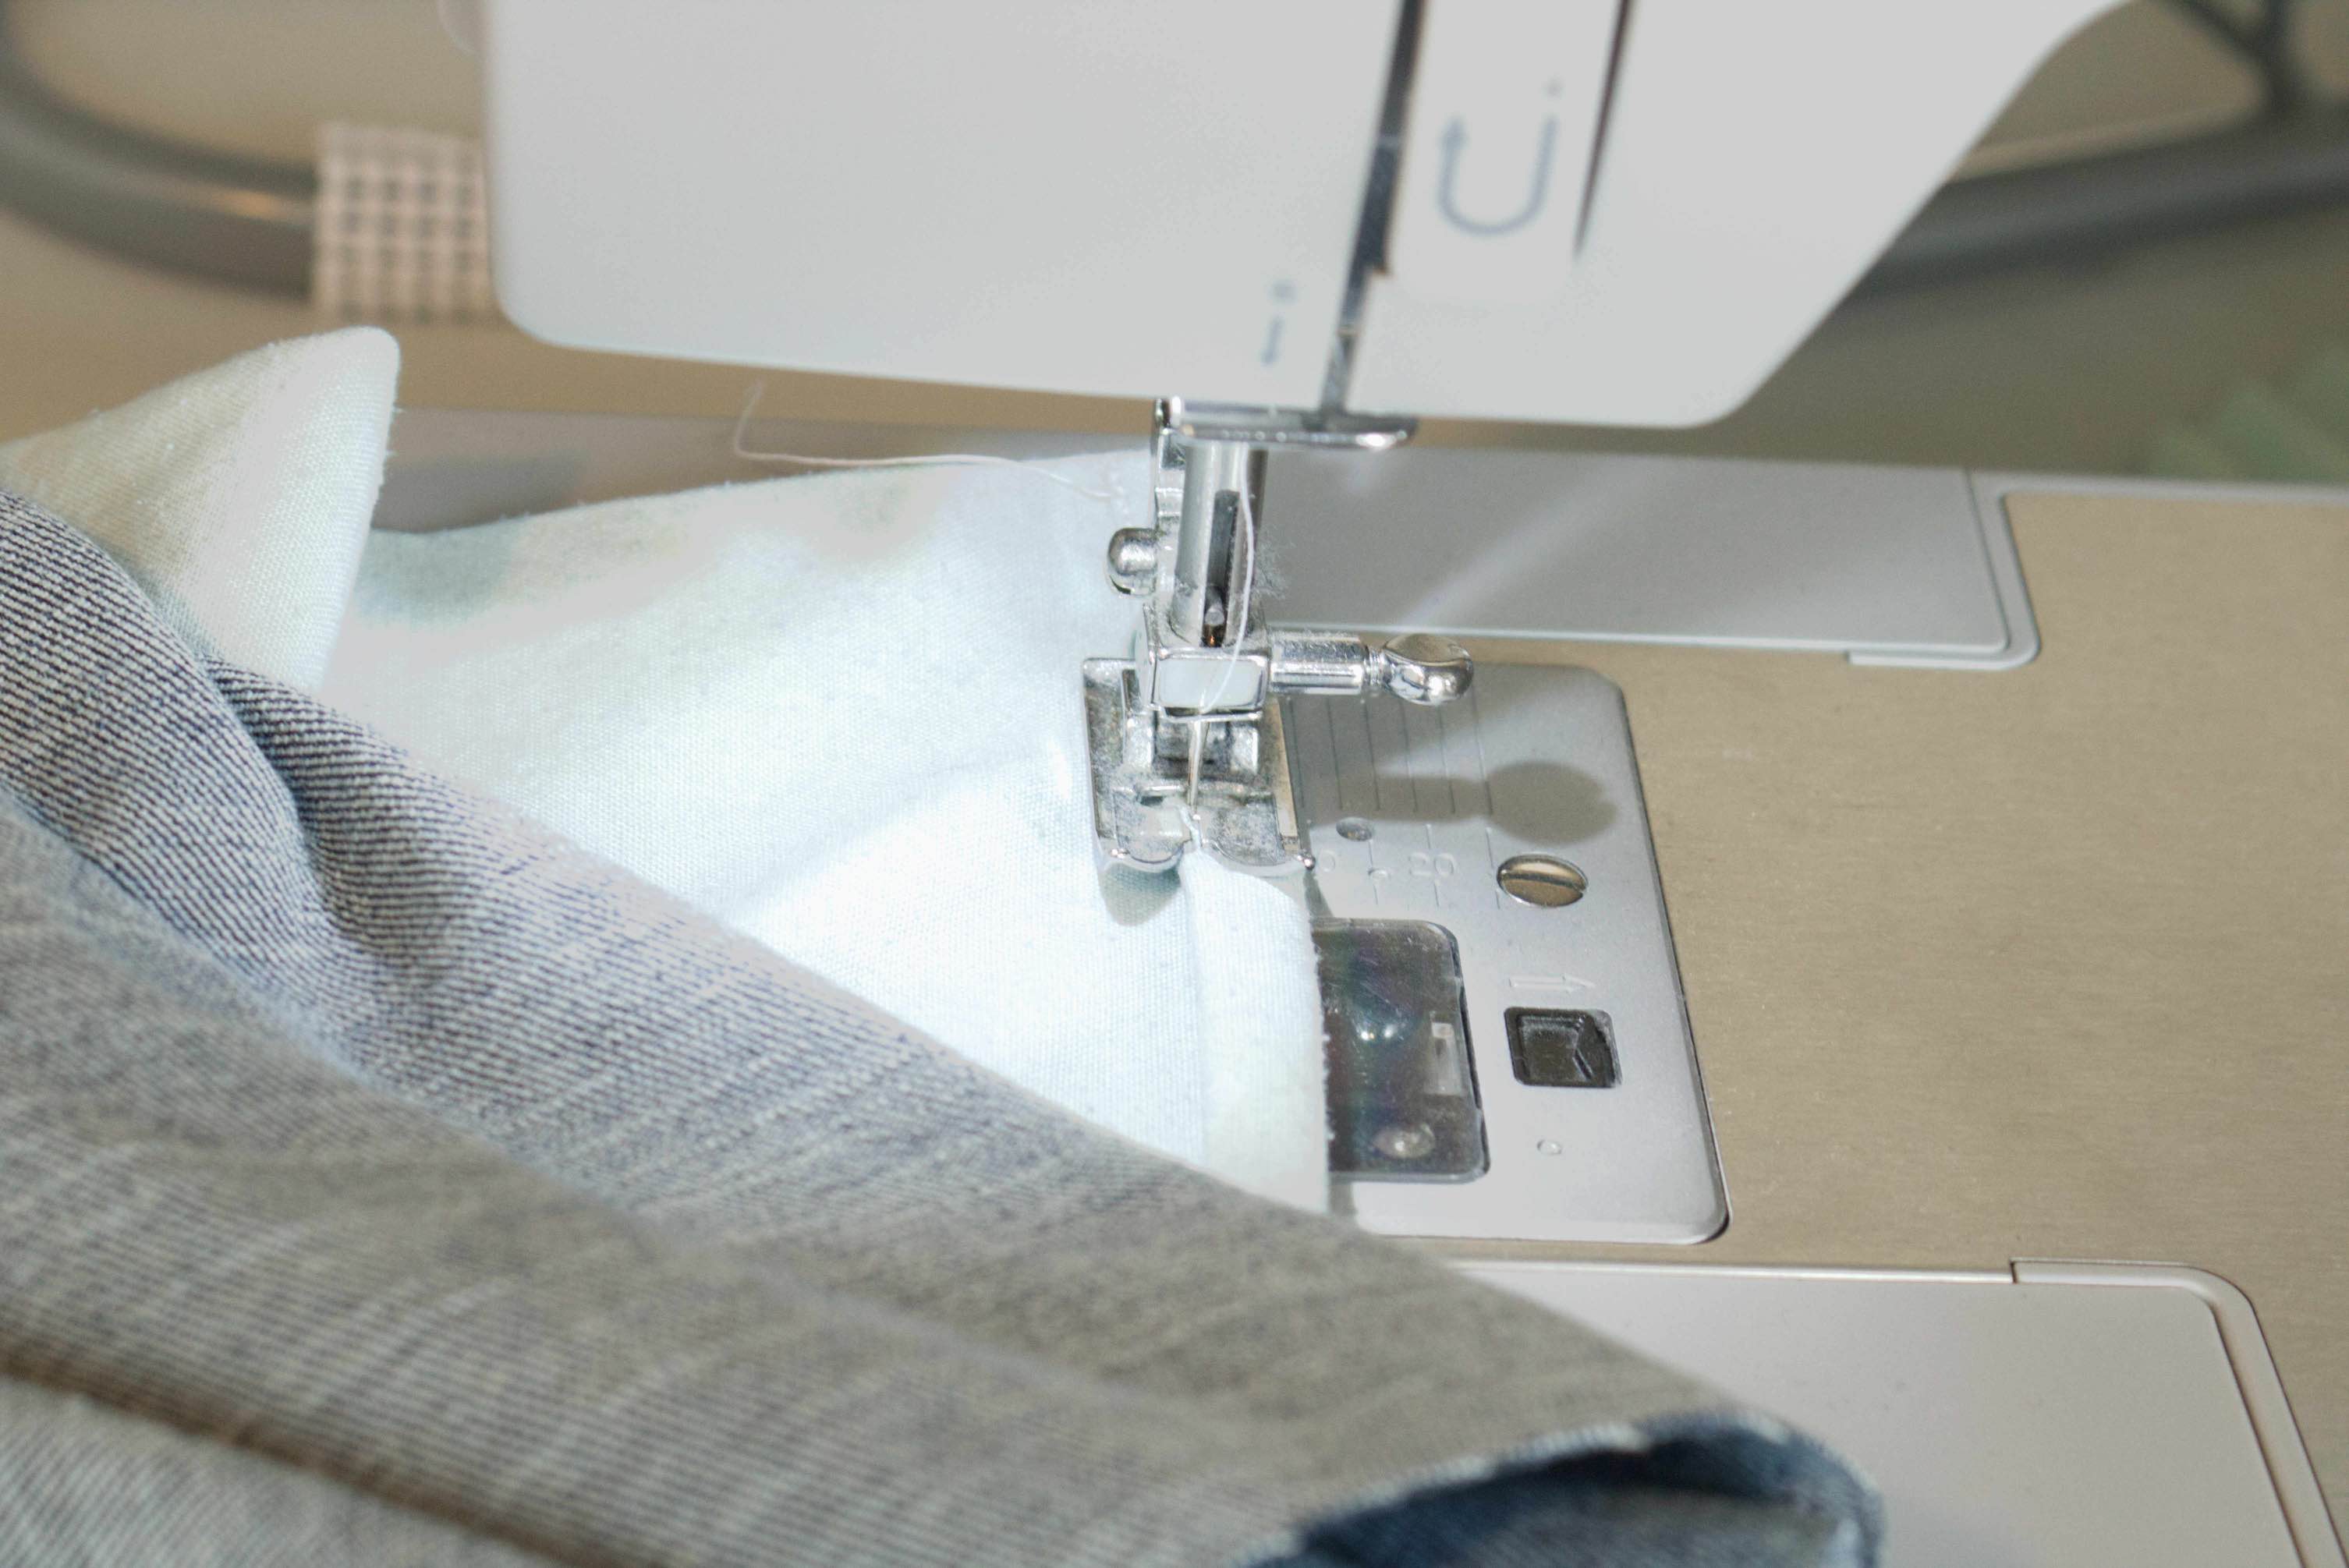 The rolled hem under the sewing machine foot, with the new bottom of the pocket at the edge of the foot, and the needle sunk into the opposite edge of the rolled hem.